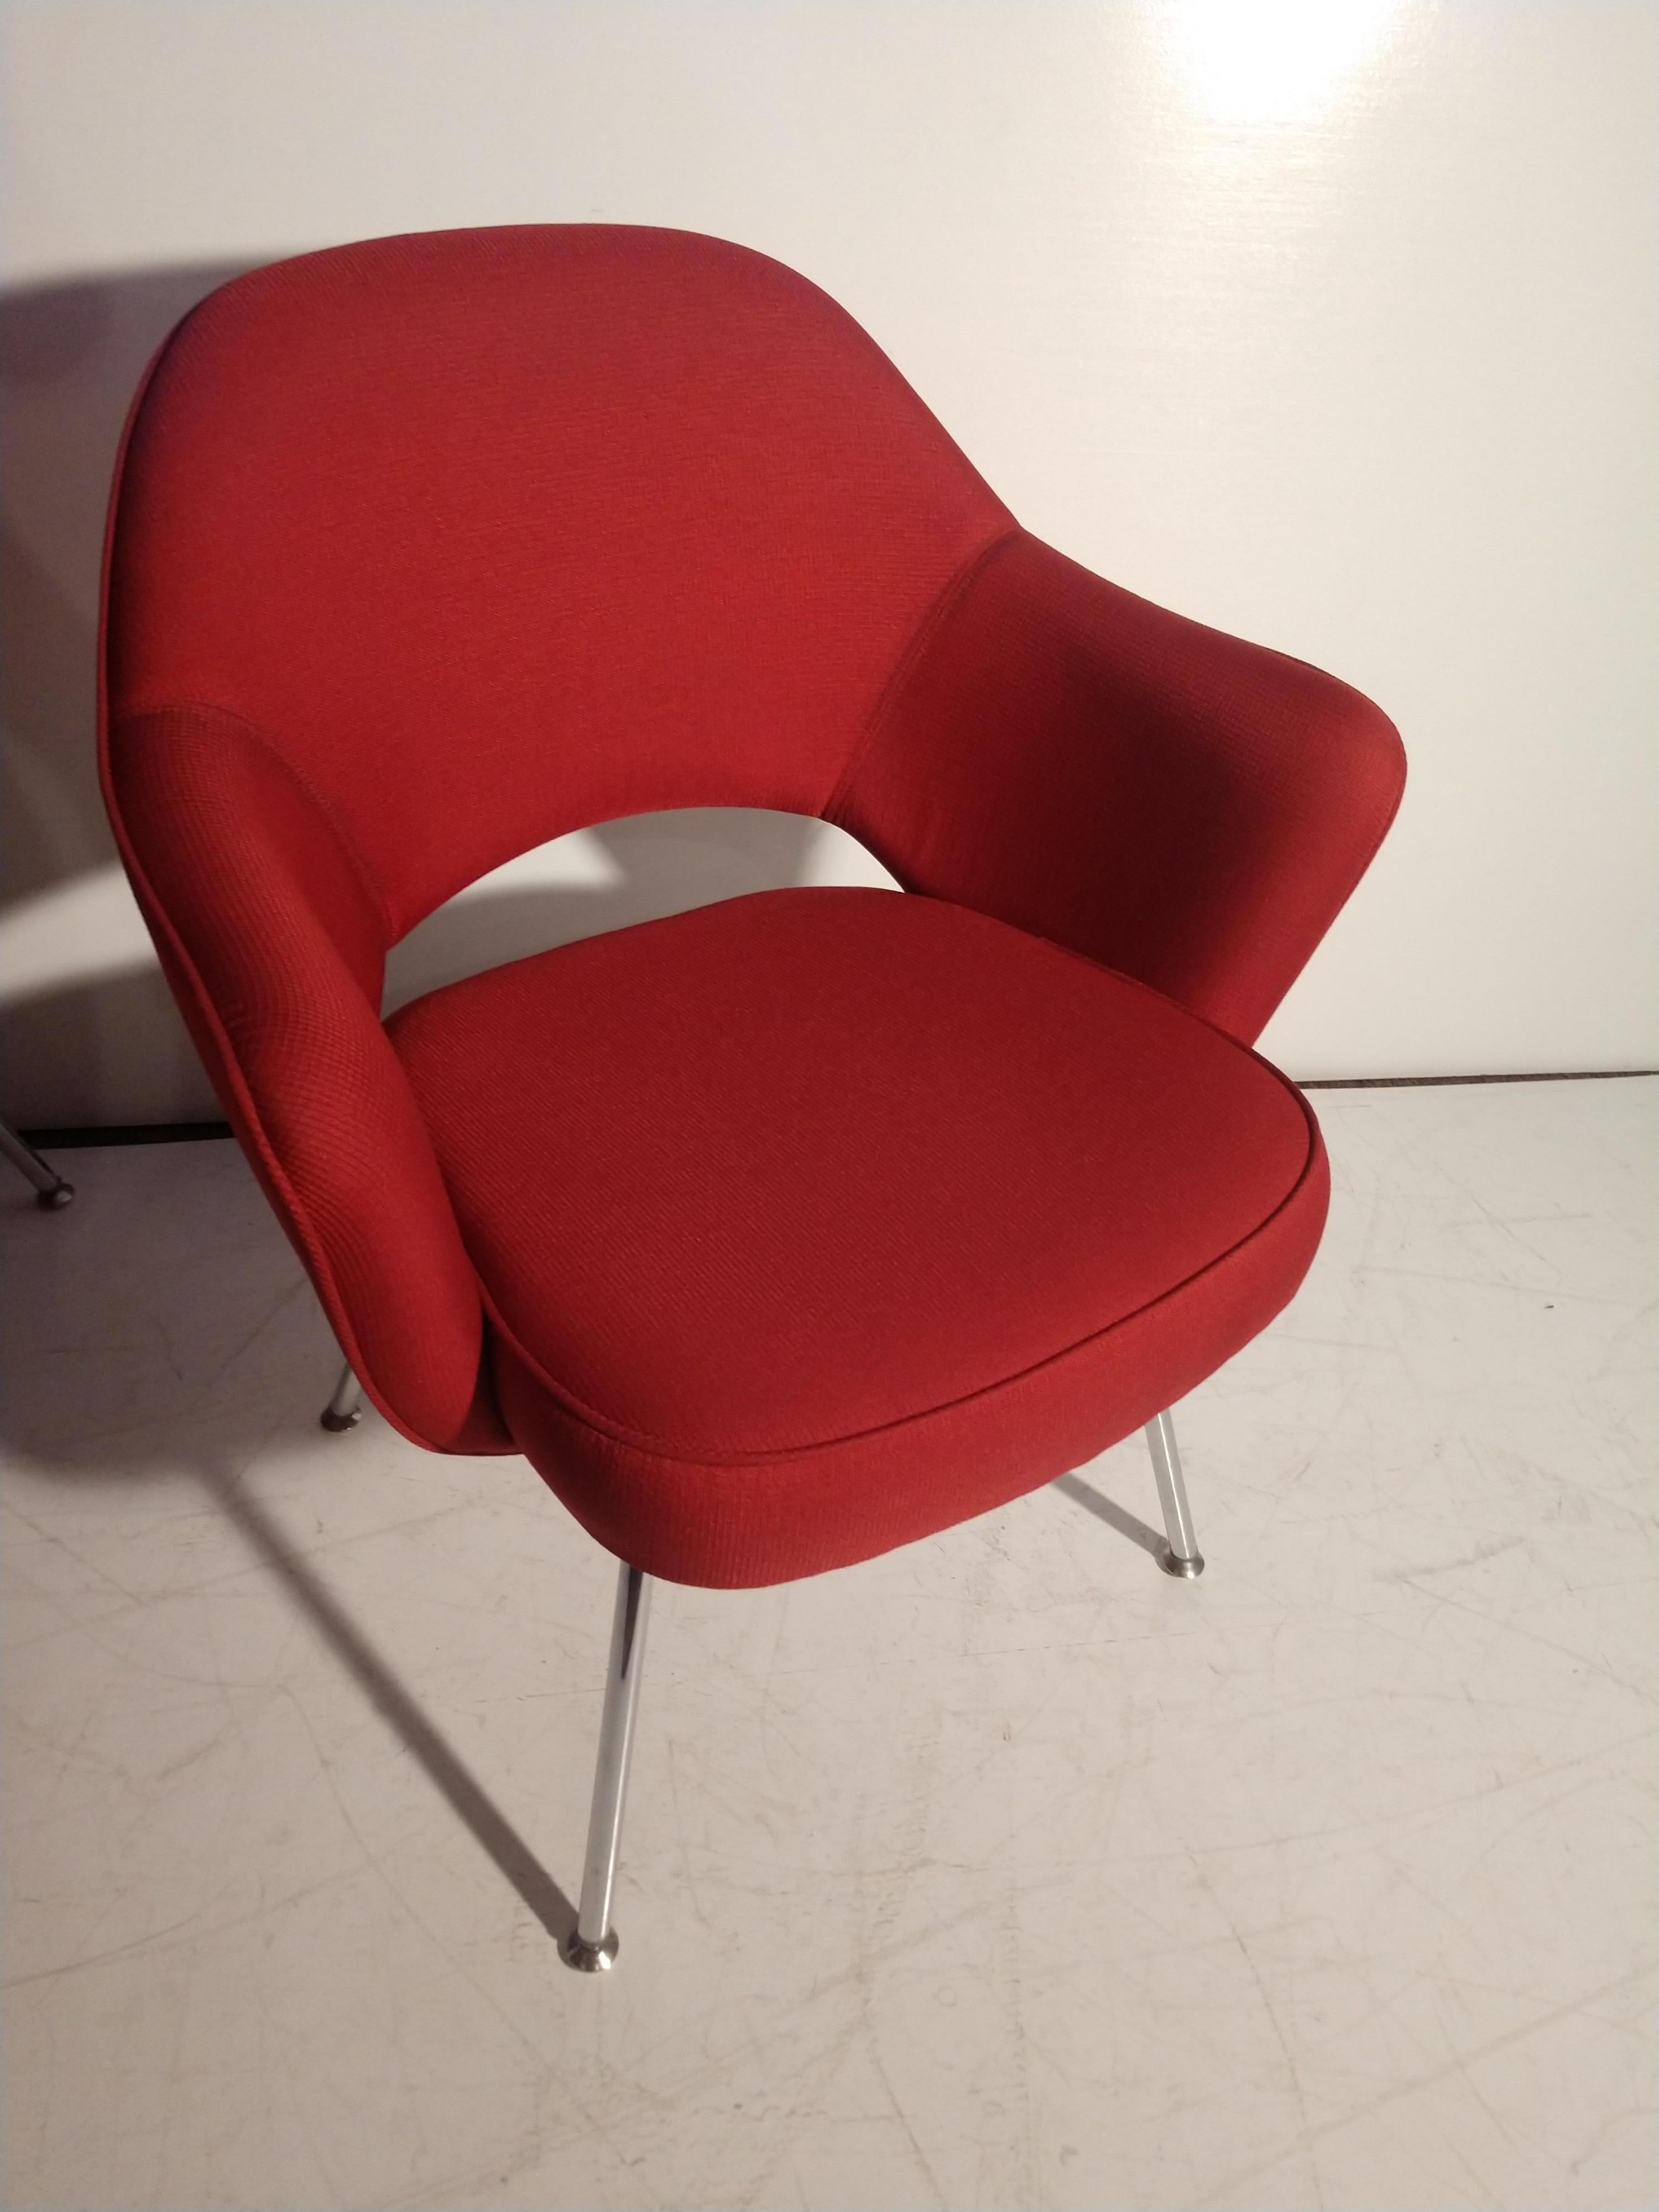 Set of 4 Saarinen executive chairs in a red fabric. Chairs are basically new, have not been used very much at all. Tag reads distributed by knoll. Measure: Seat height is 17.